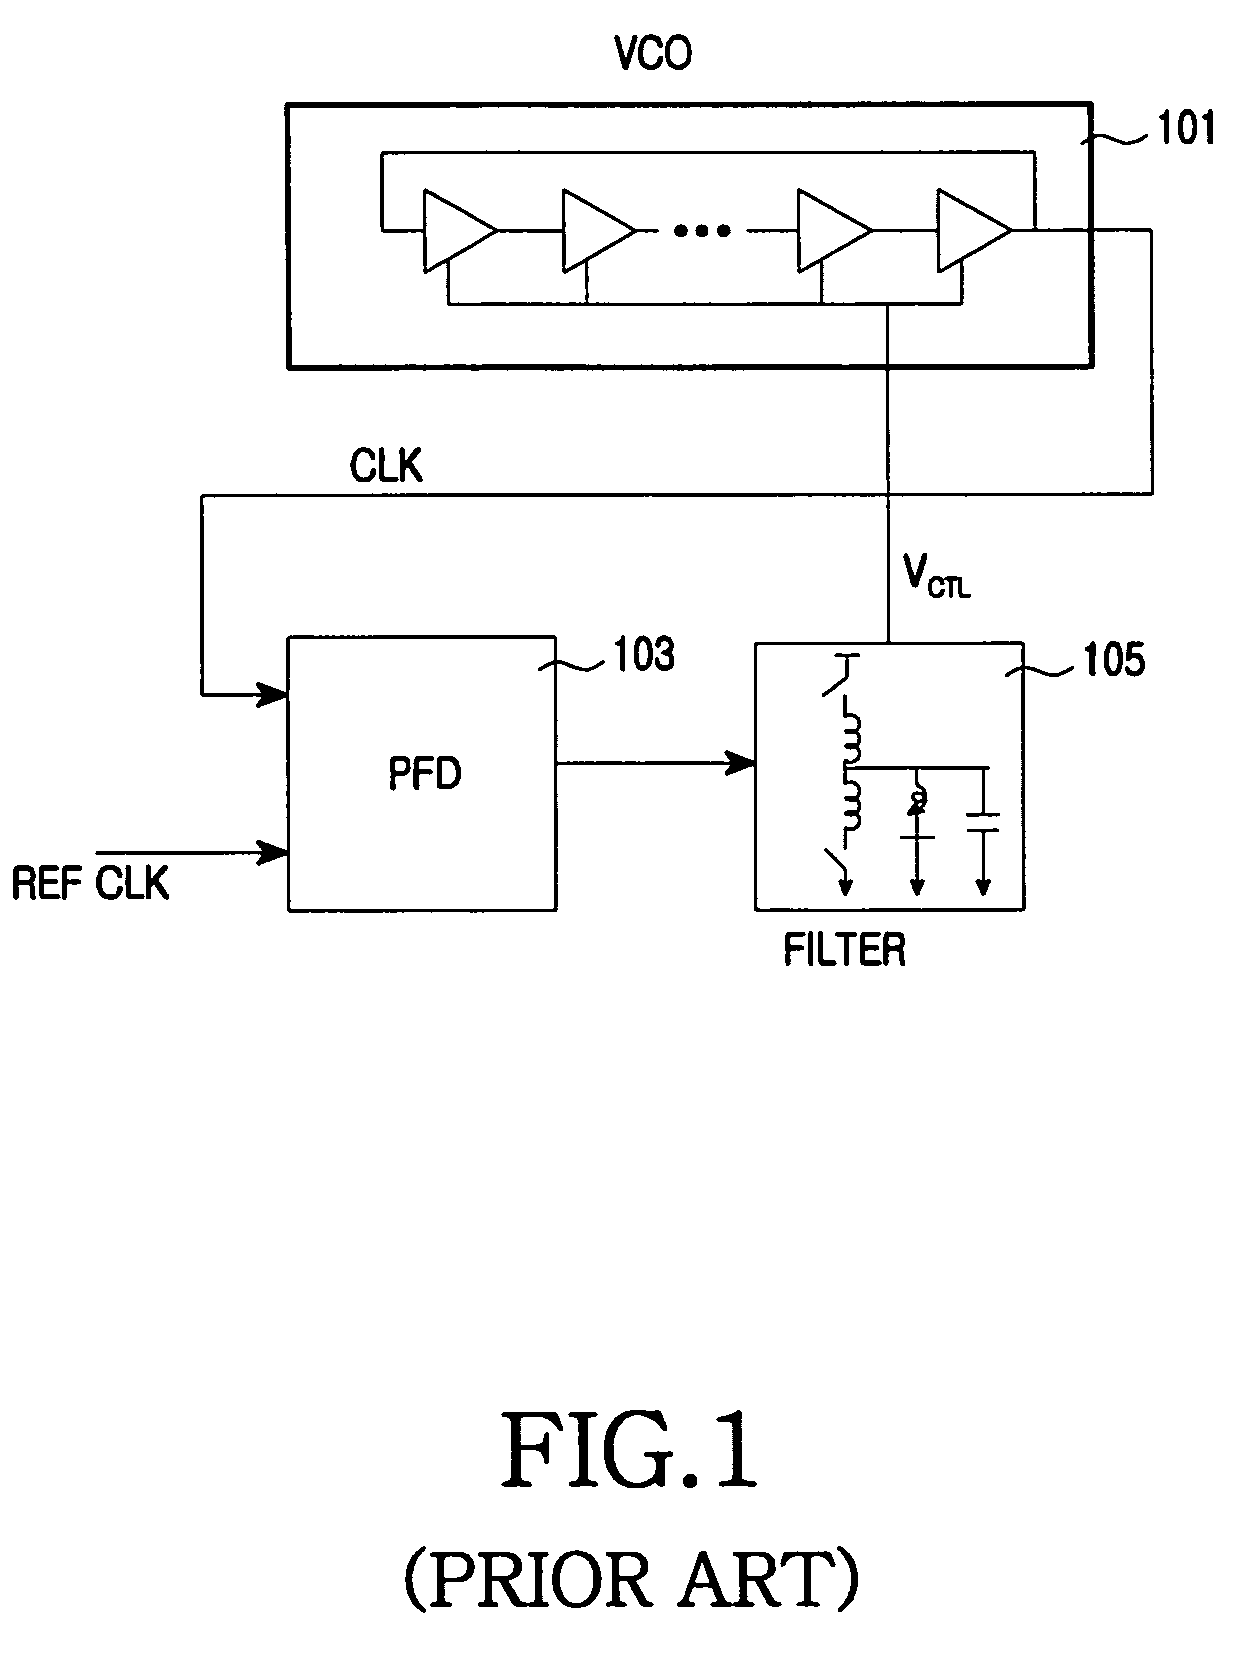 Apparatus and method for frequency synthesis using delay locked loop